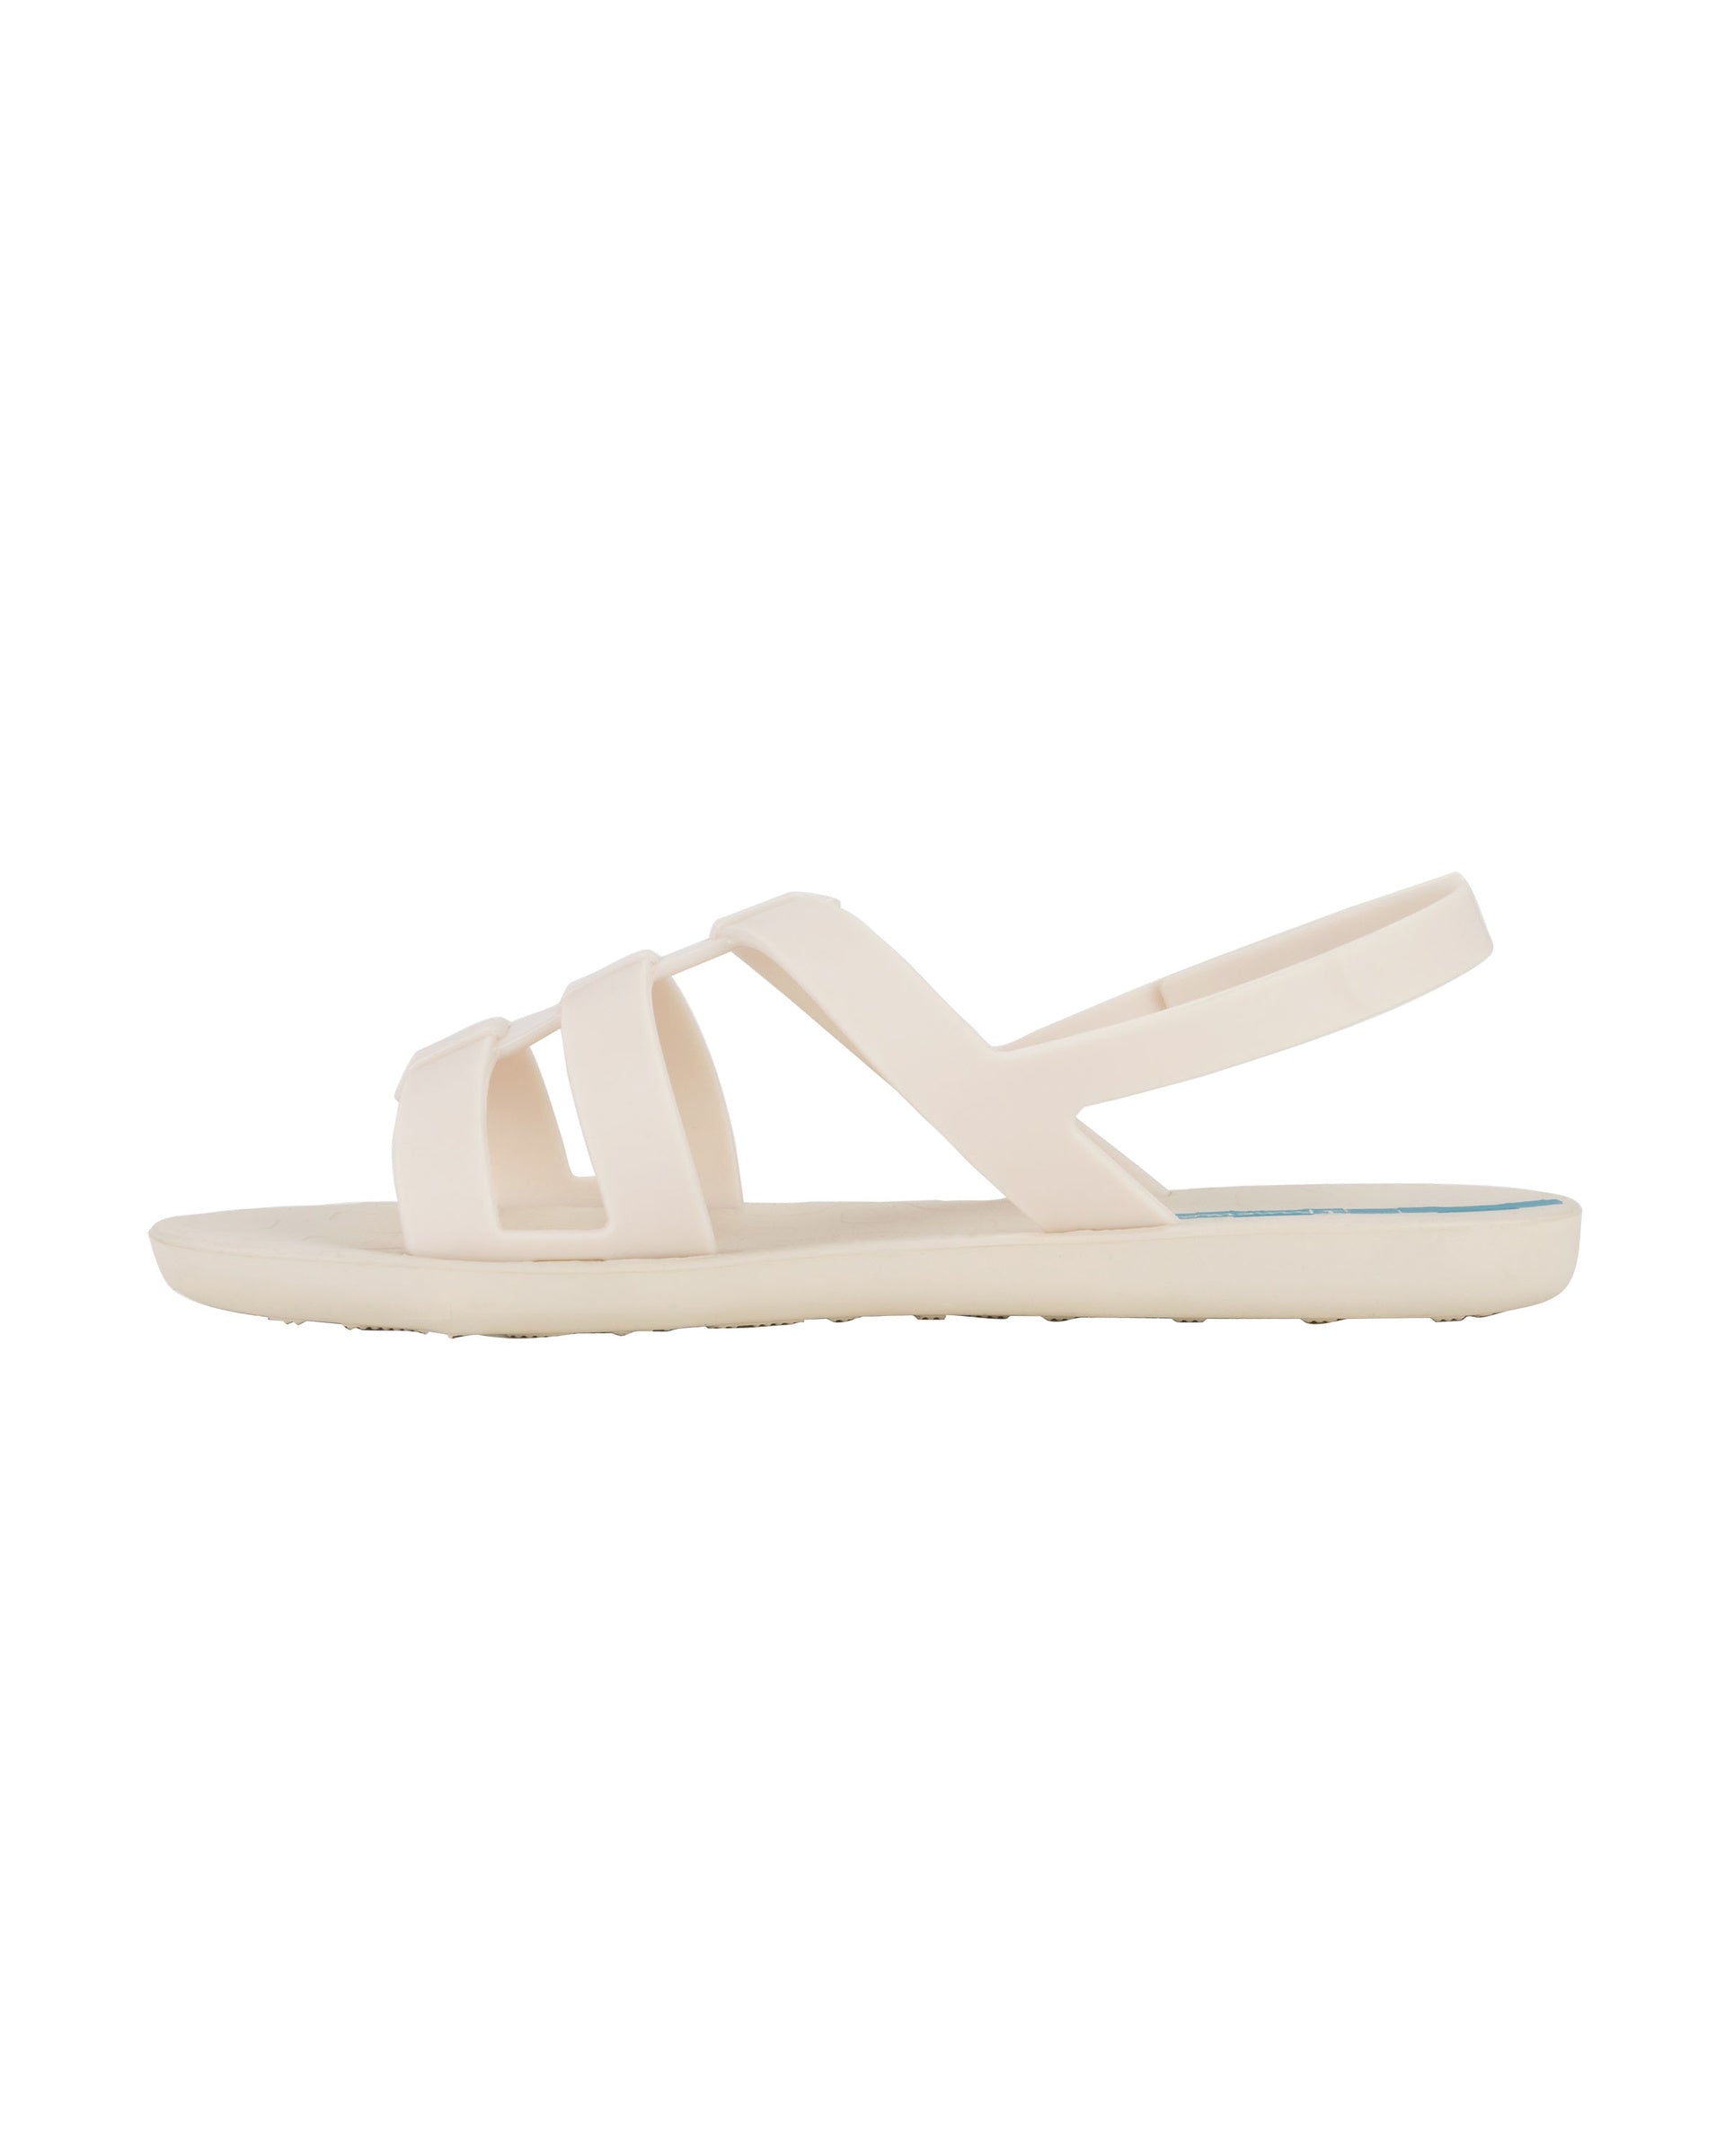 Inner side view of a beige Ipanema Style women's sandal.